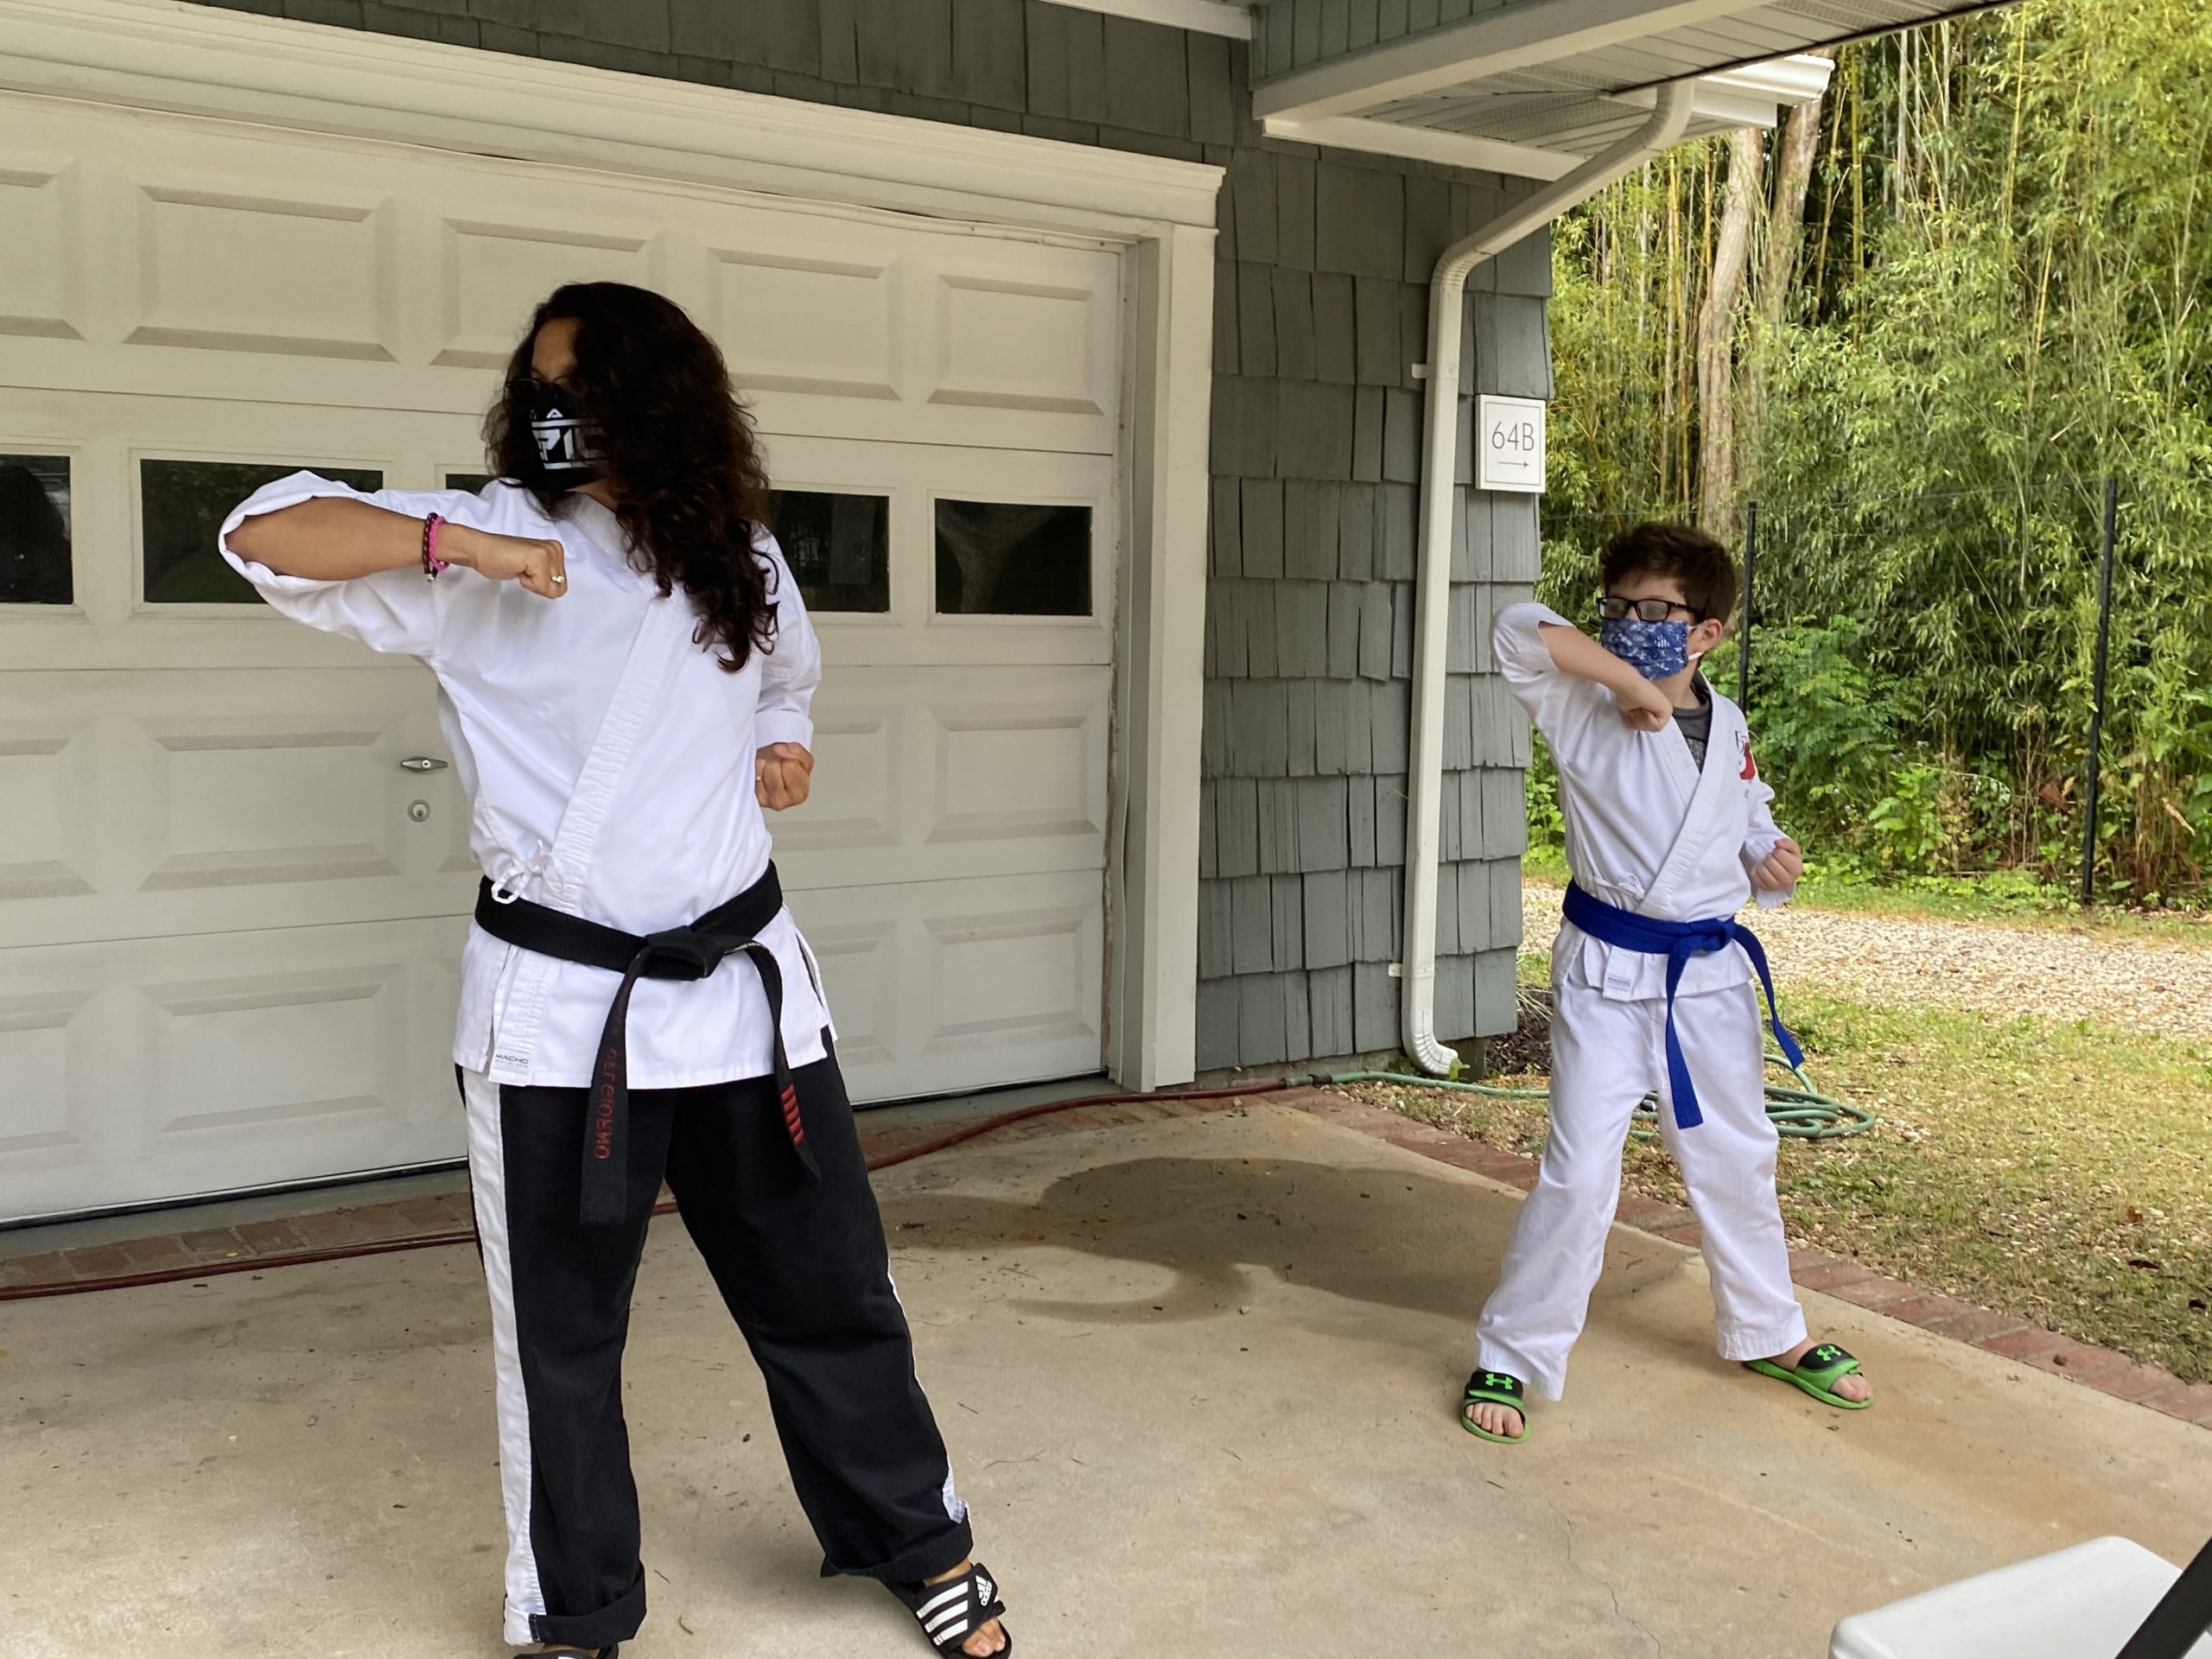 Michelle Del Giorno teaching a private martial arts lesson to student Wilson Lones at his home on Shelter Island